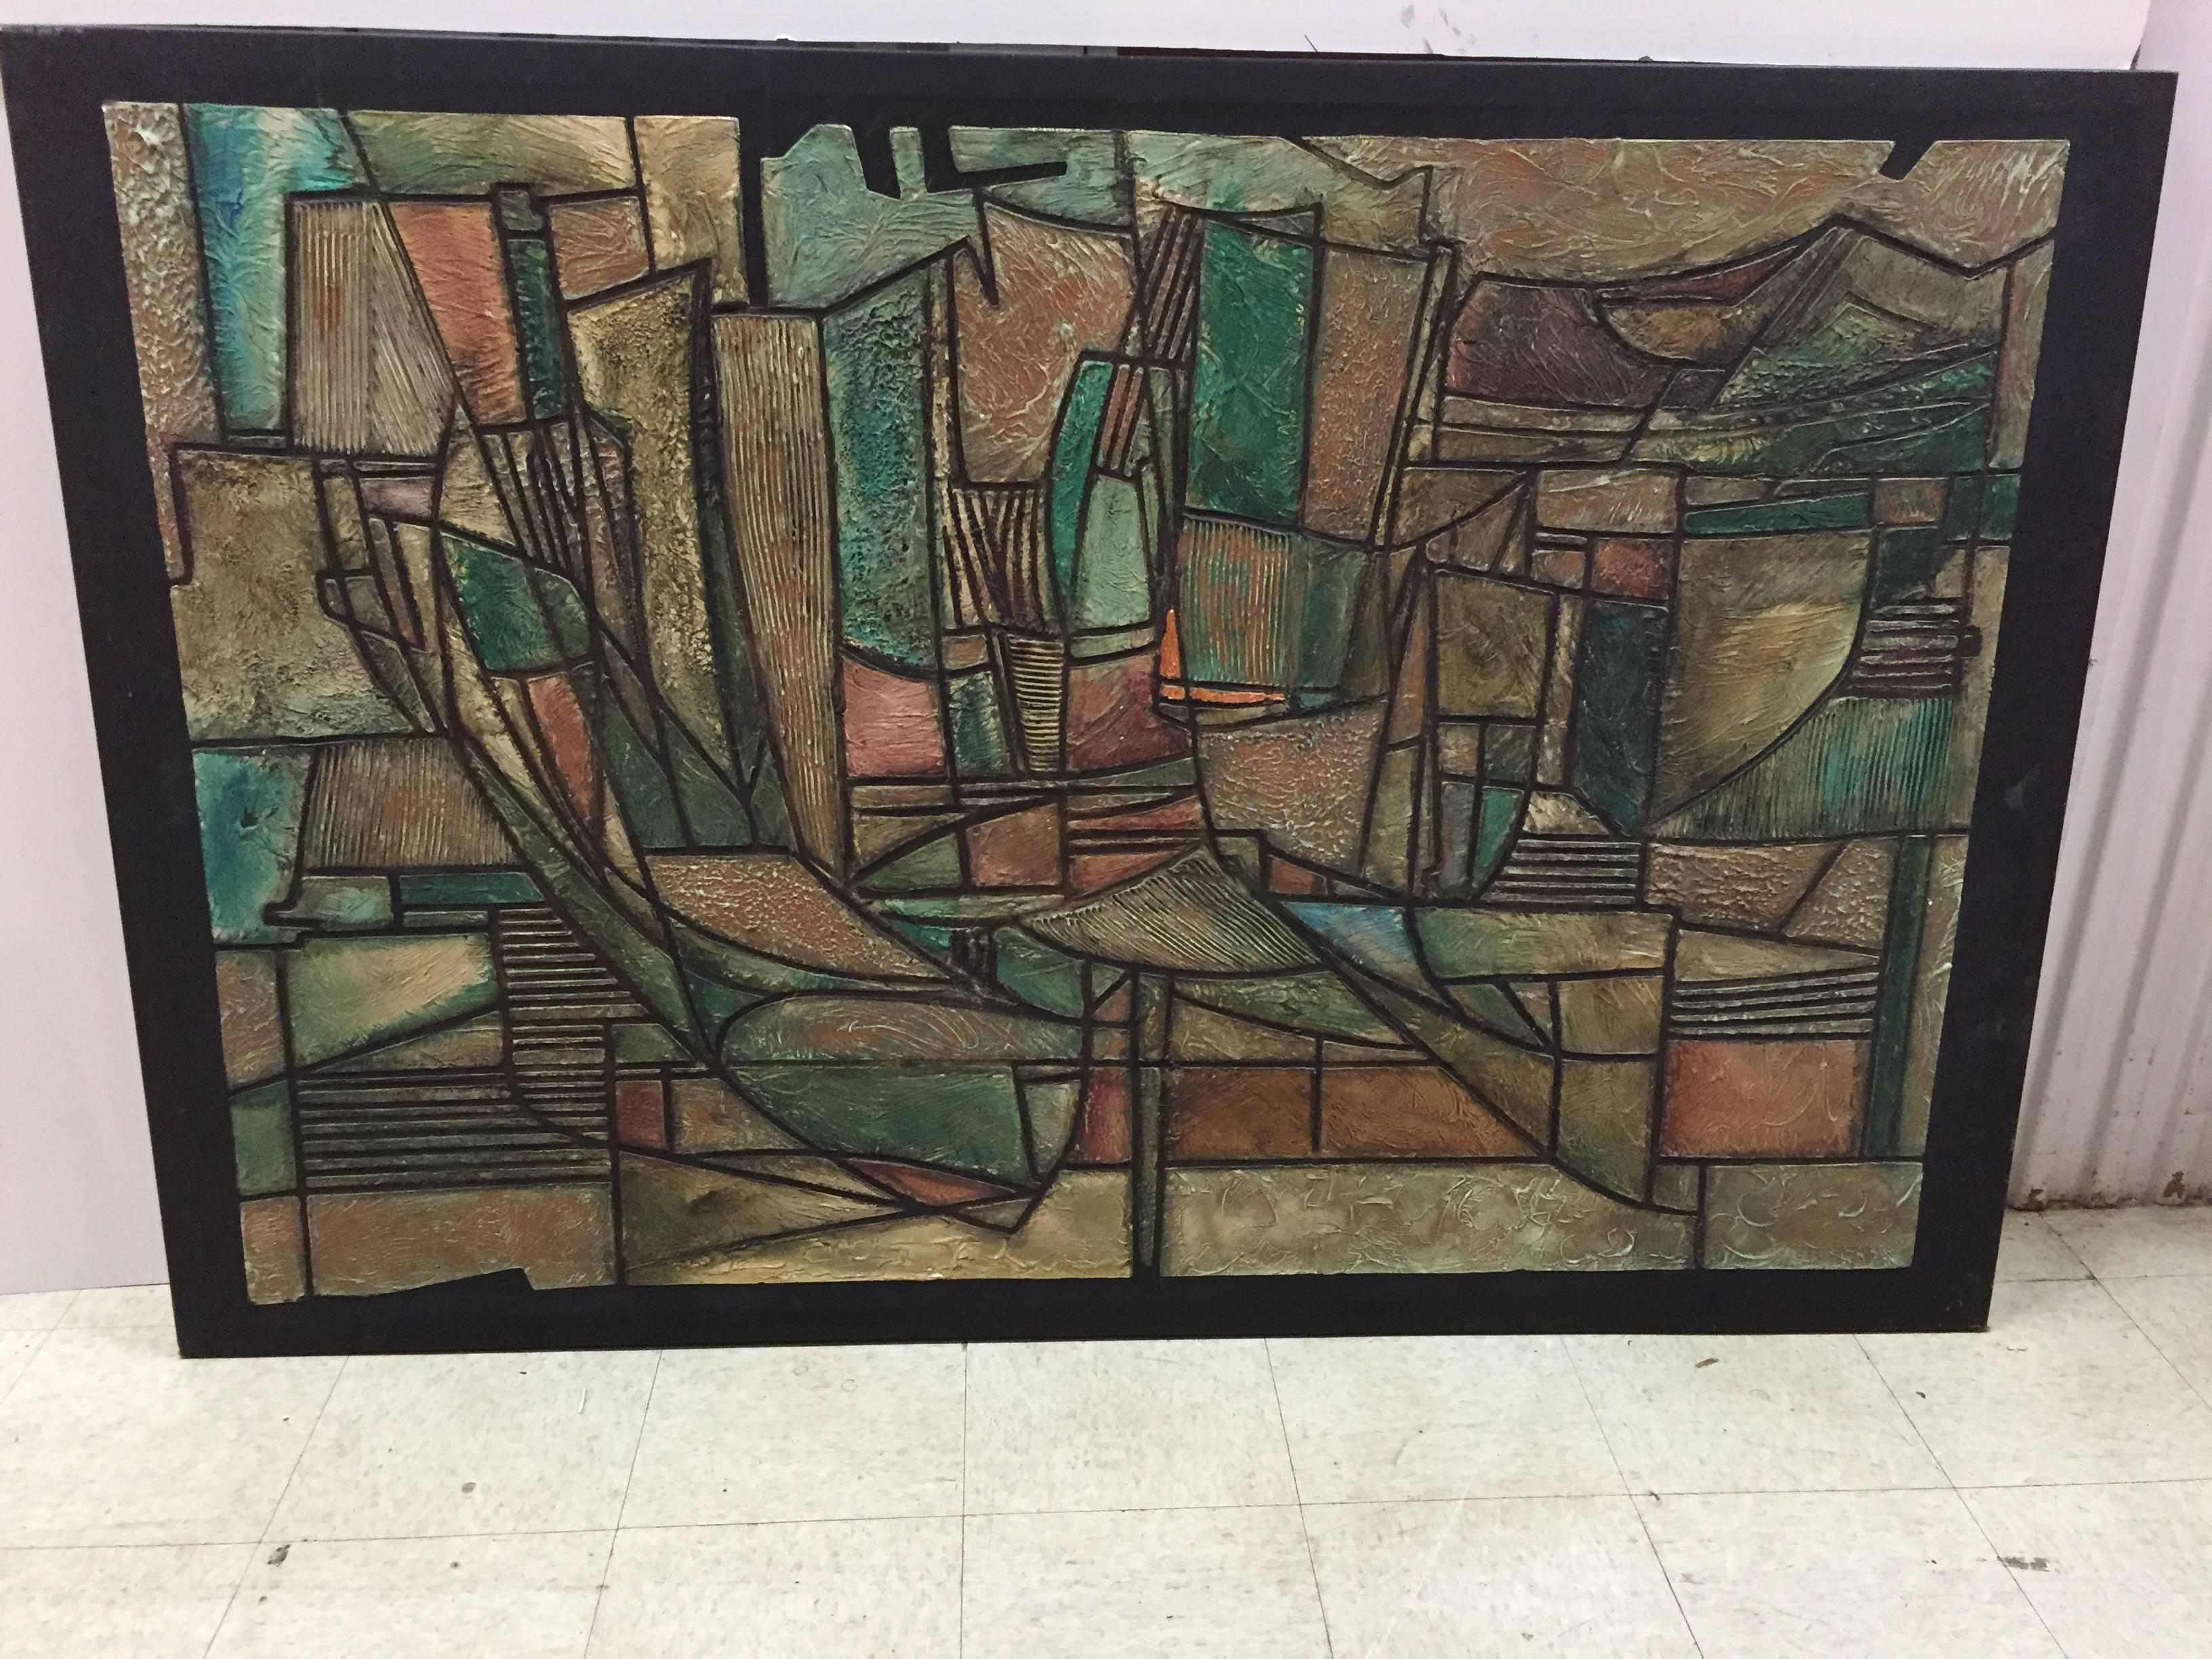 Each large abstract impression painting is priced and available individually, Green Leaf painting is $3600.